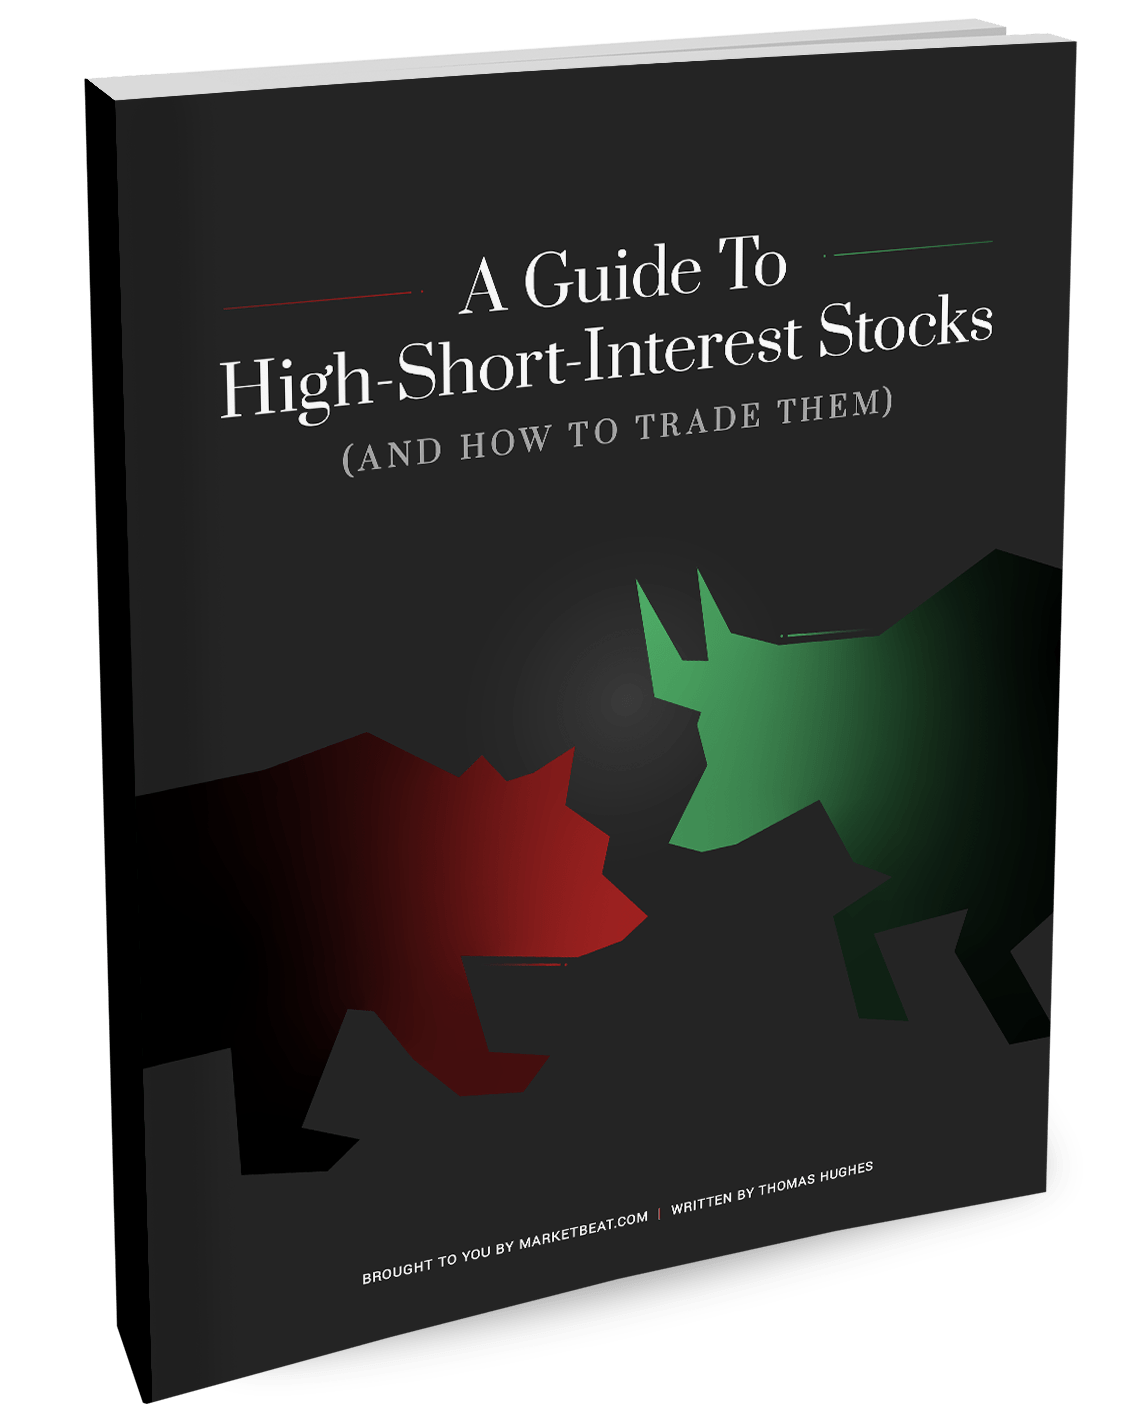 A Guide to Hedging Short and High Interest Stocks